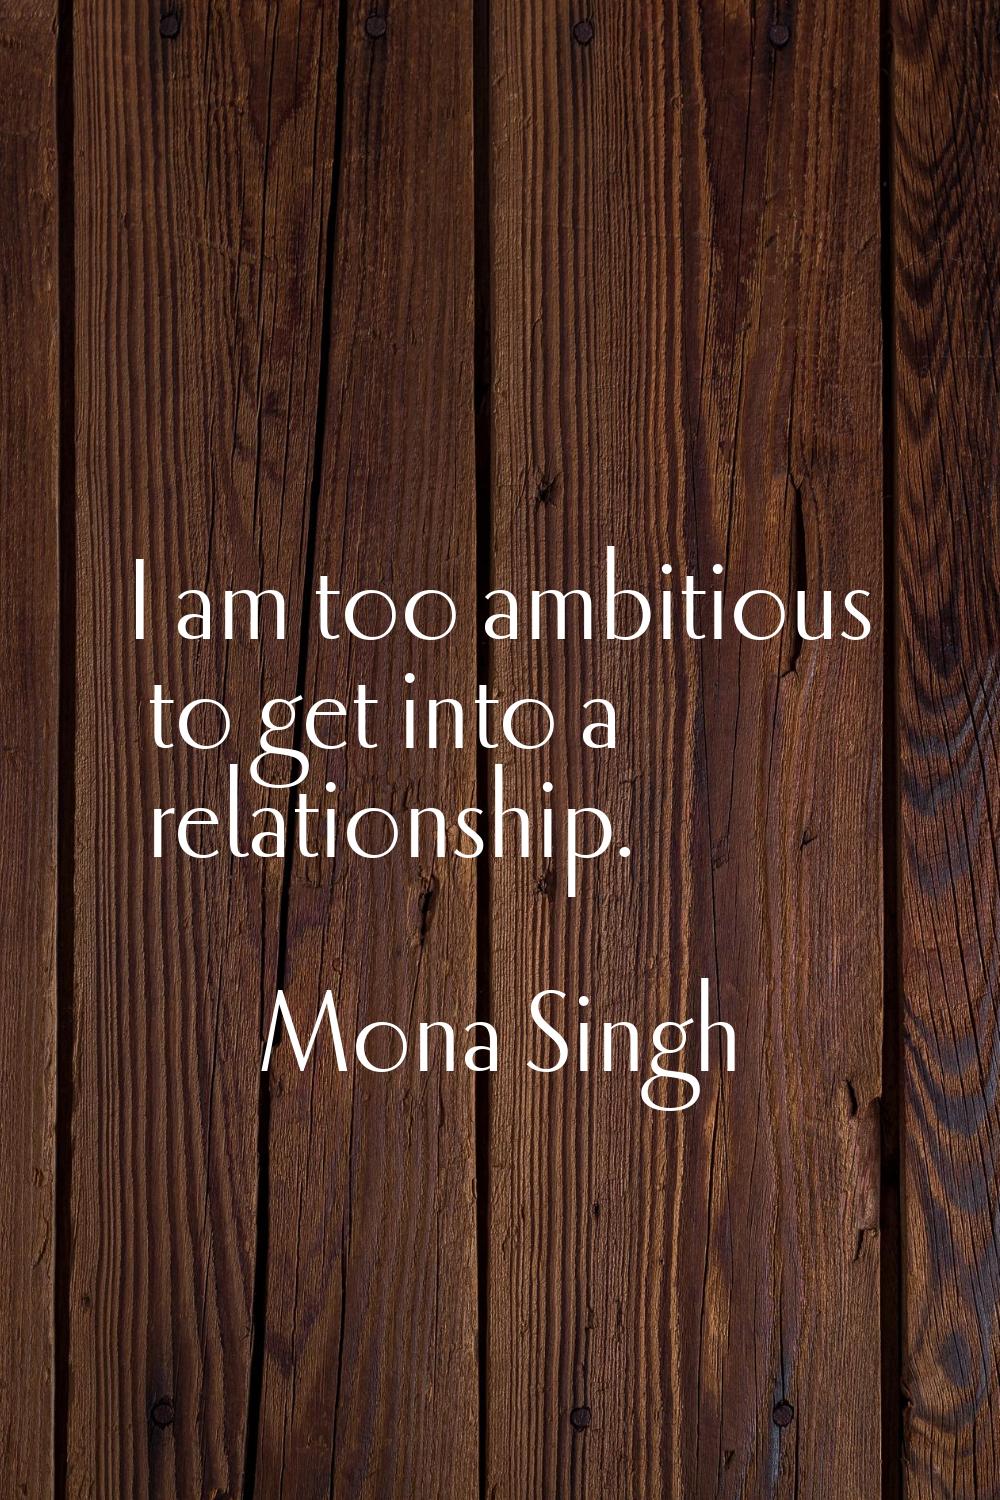 I am too ambitious to get into a relationship.